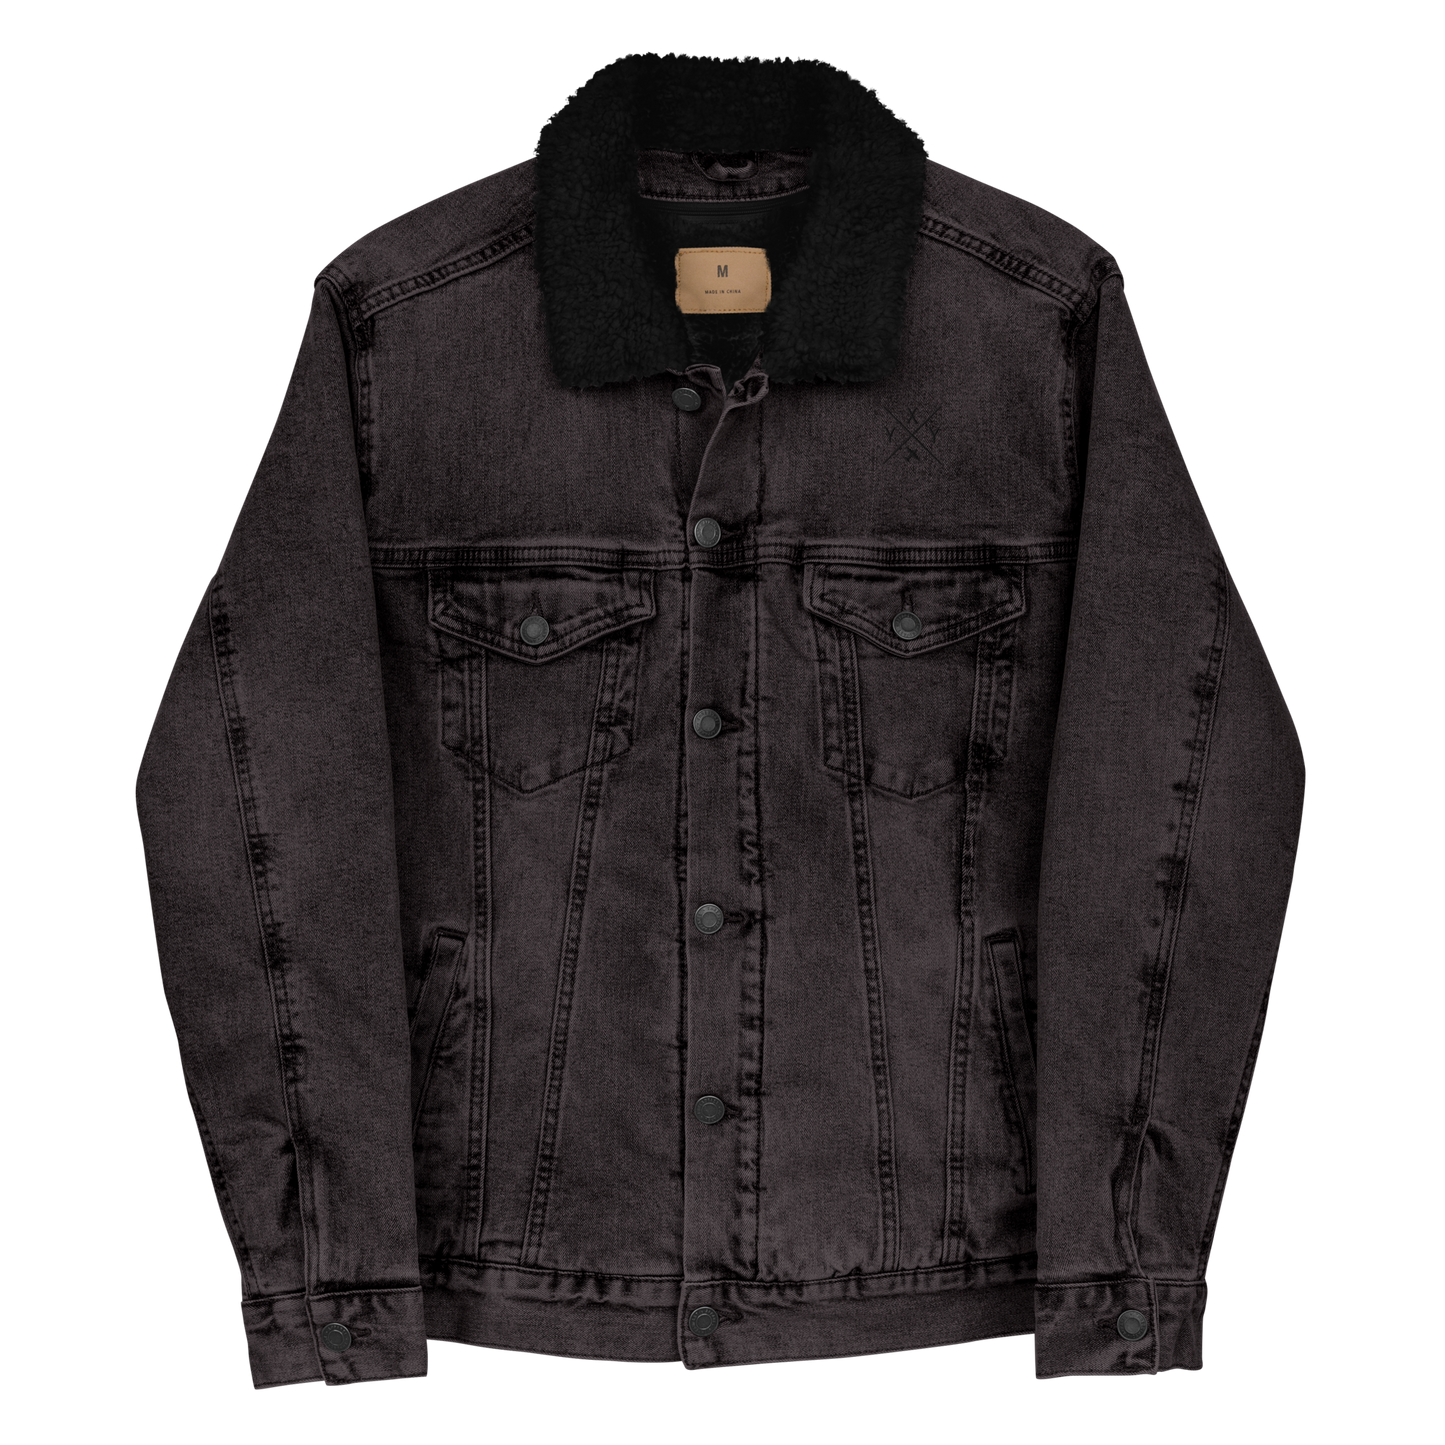 YHM Designs - YXY Whitehorse Denim Sherpa Jacket - Crossed-X Design with Airport Code and Vintage Propliner - Black & White Embroidery - Image 06